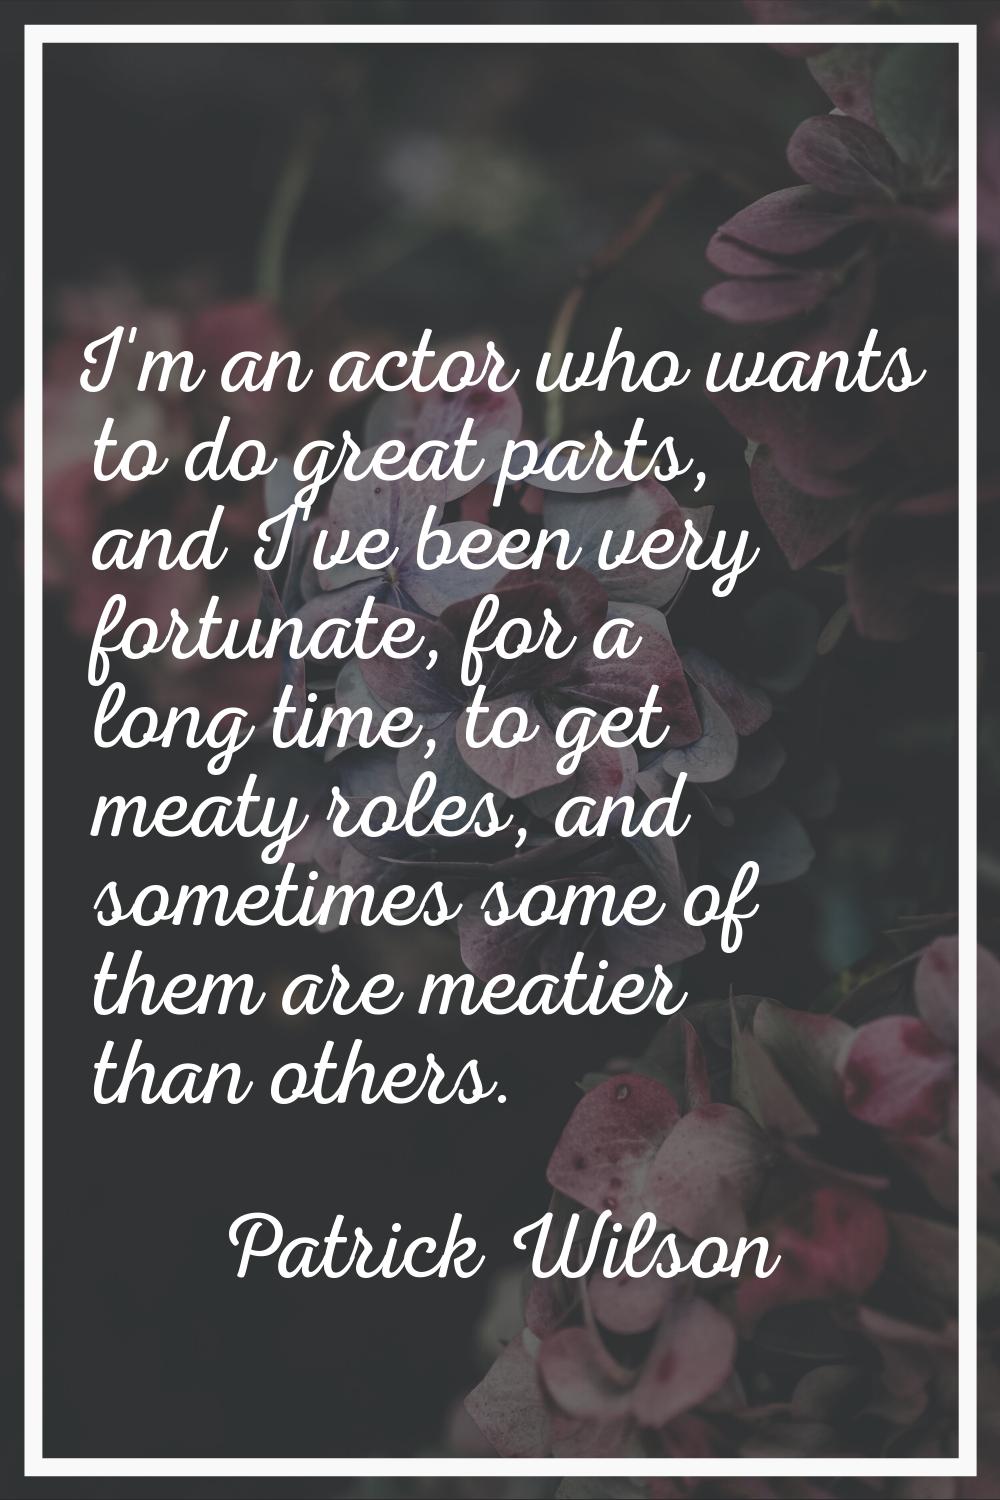 I'm an actor who wants to do great parts, and I've been very fortunate, for a long time, to get mea